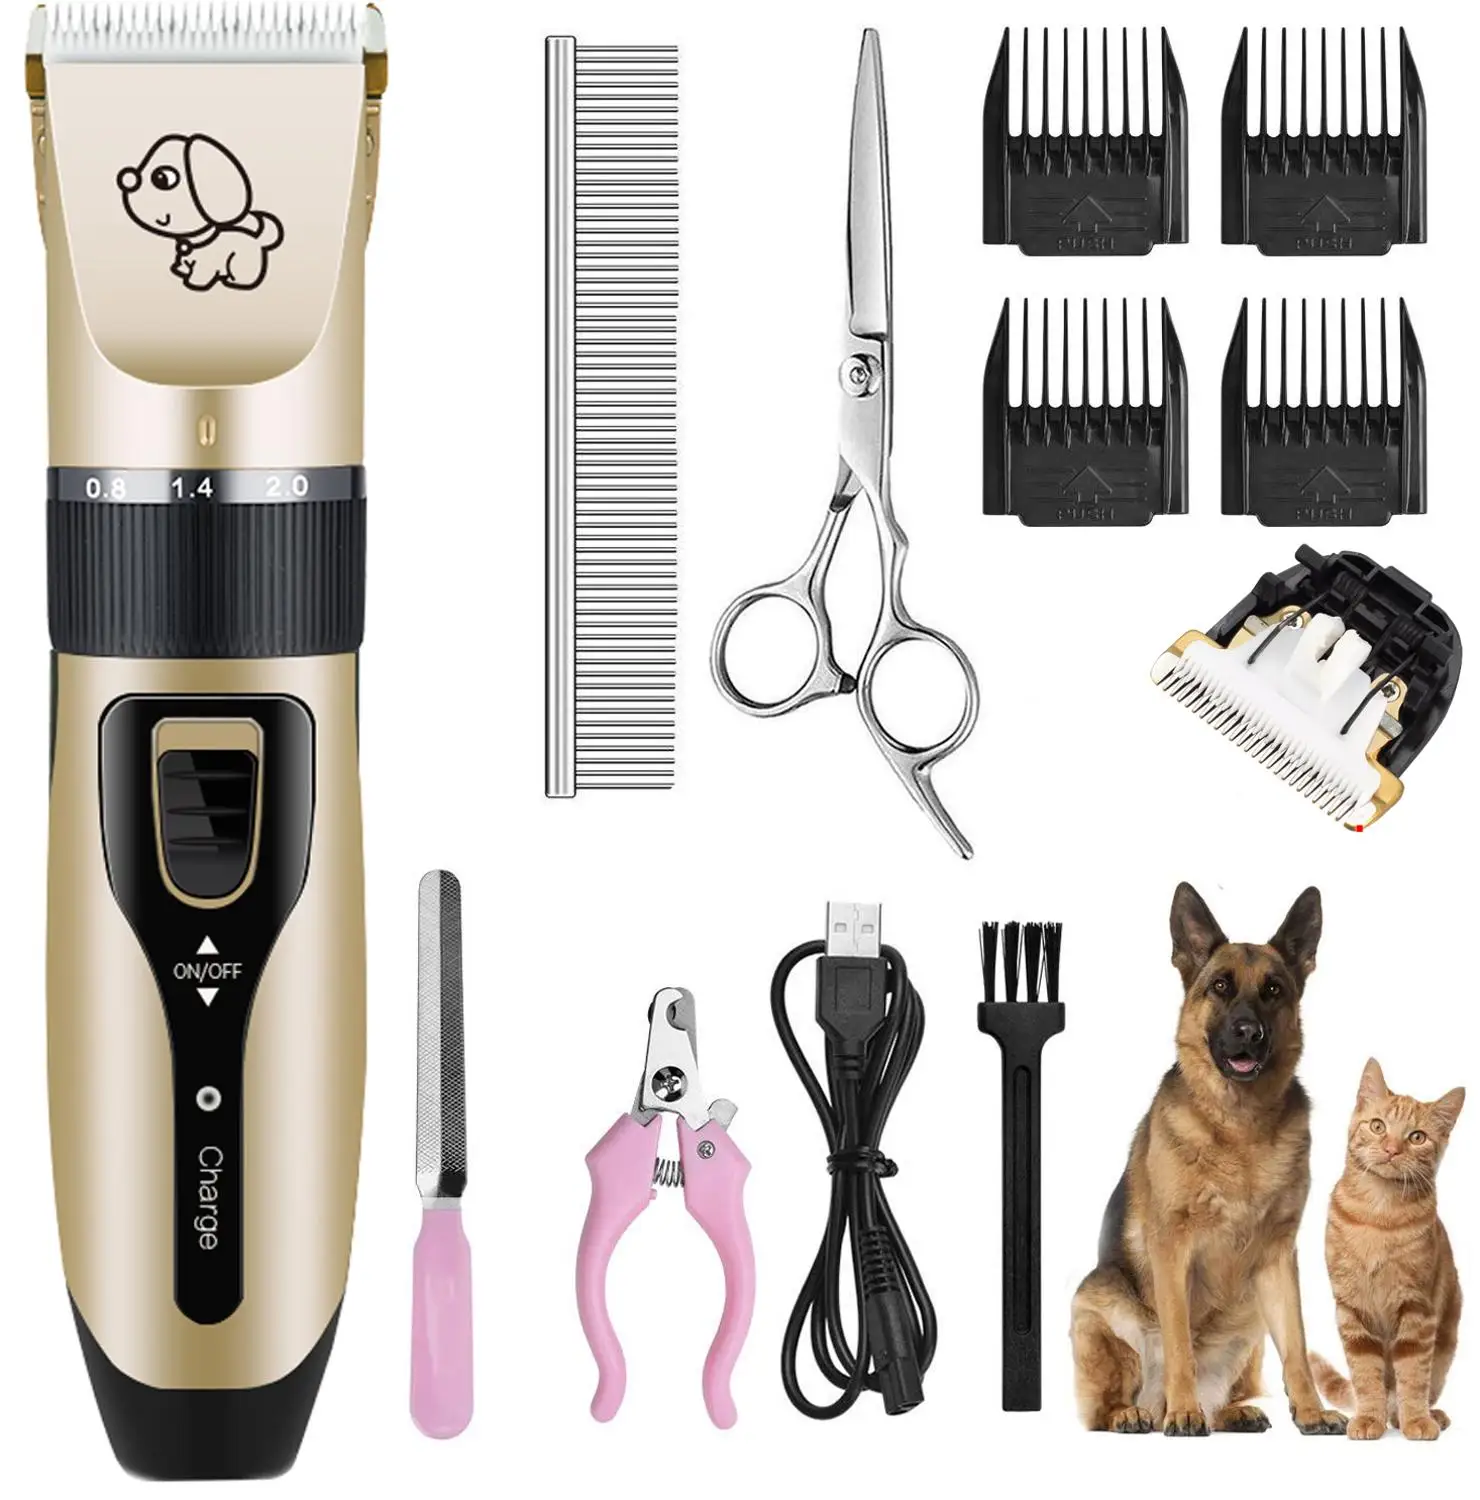 

USB Charging Dog Hair Trimmer Rechargeable Pet Cat Grooming Clippers Cutter Machine Shaver Electric Scissor Clipper 110-240V AC